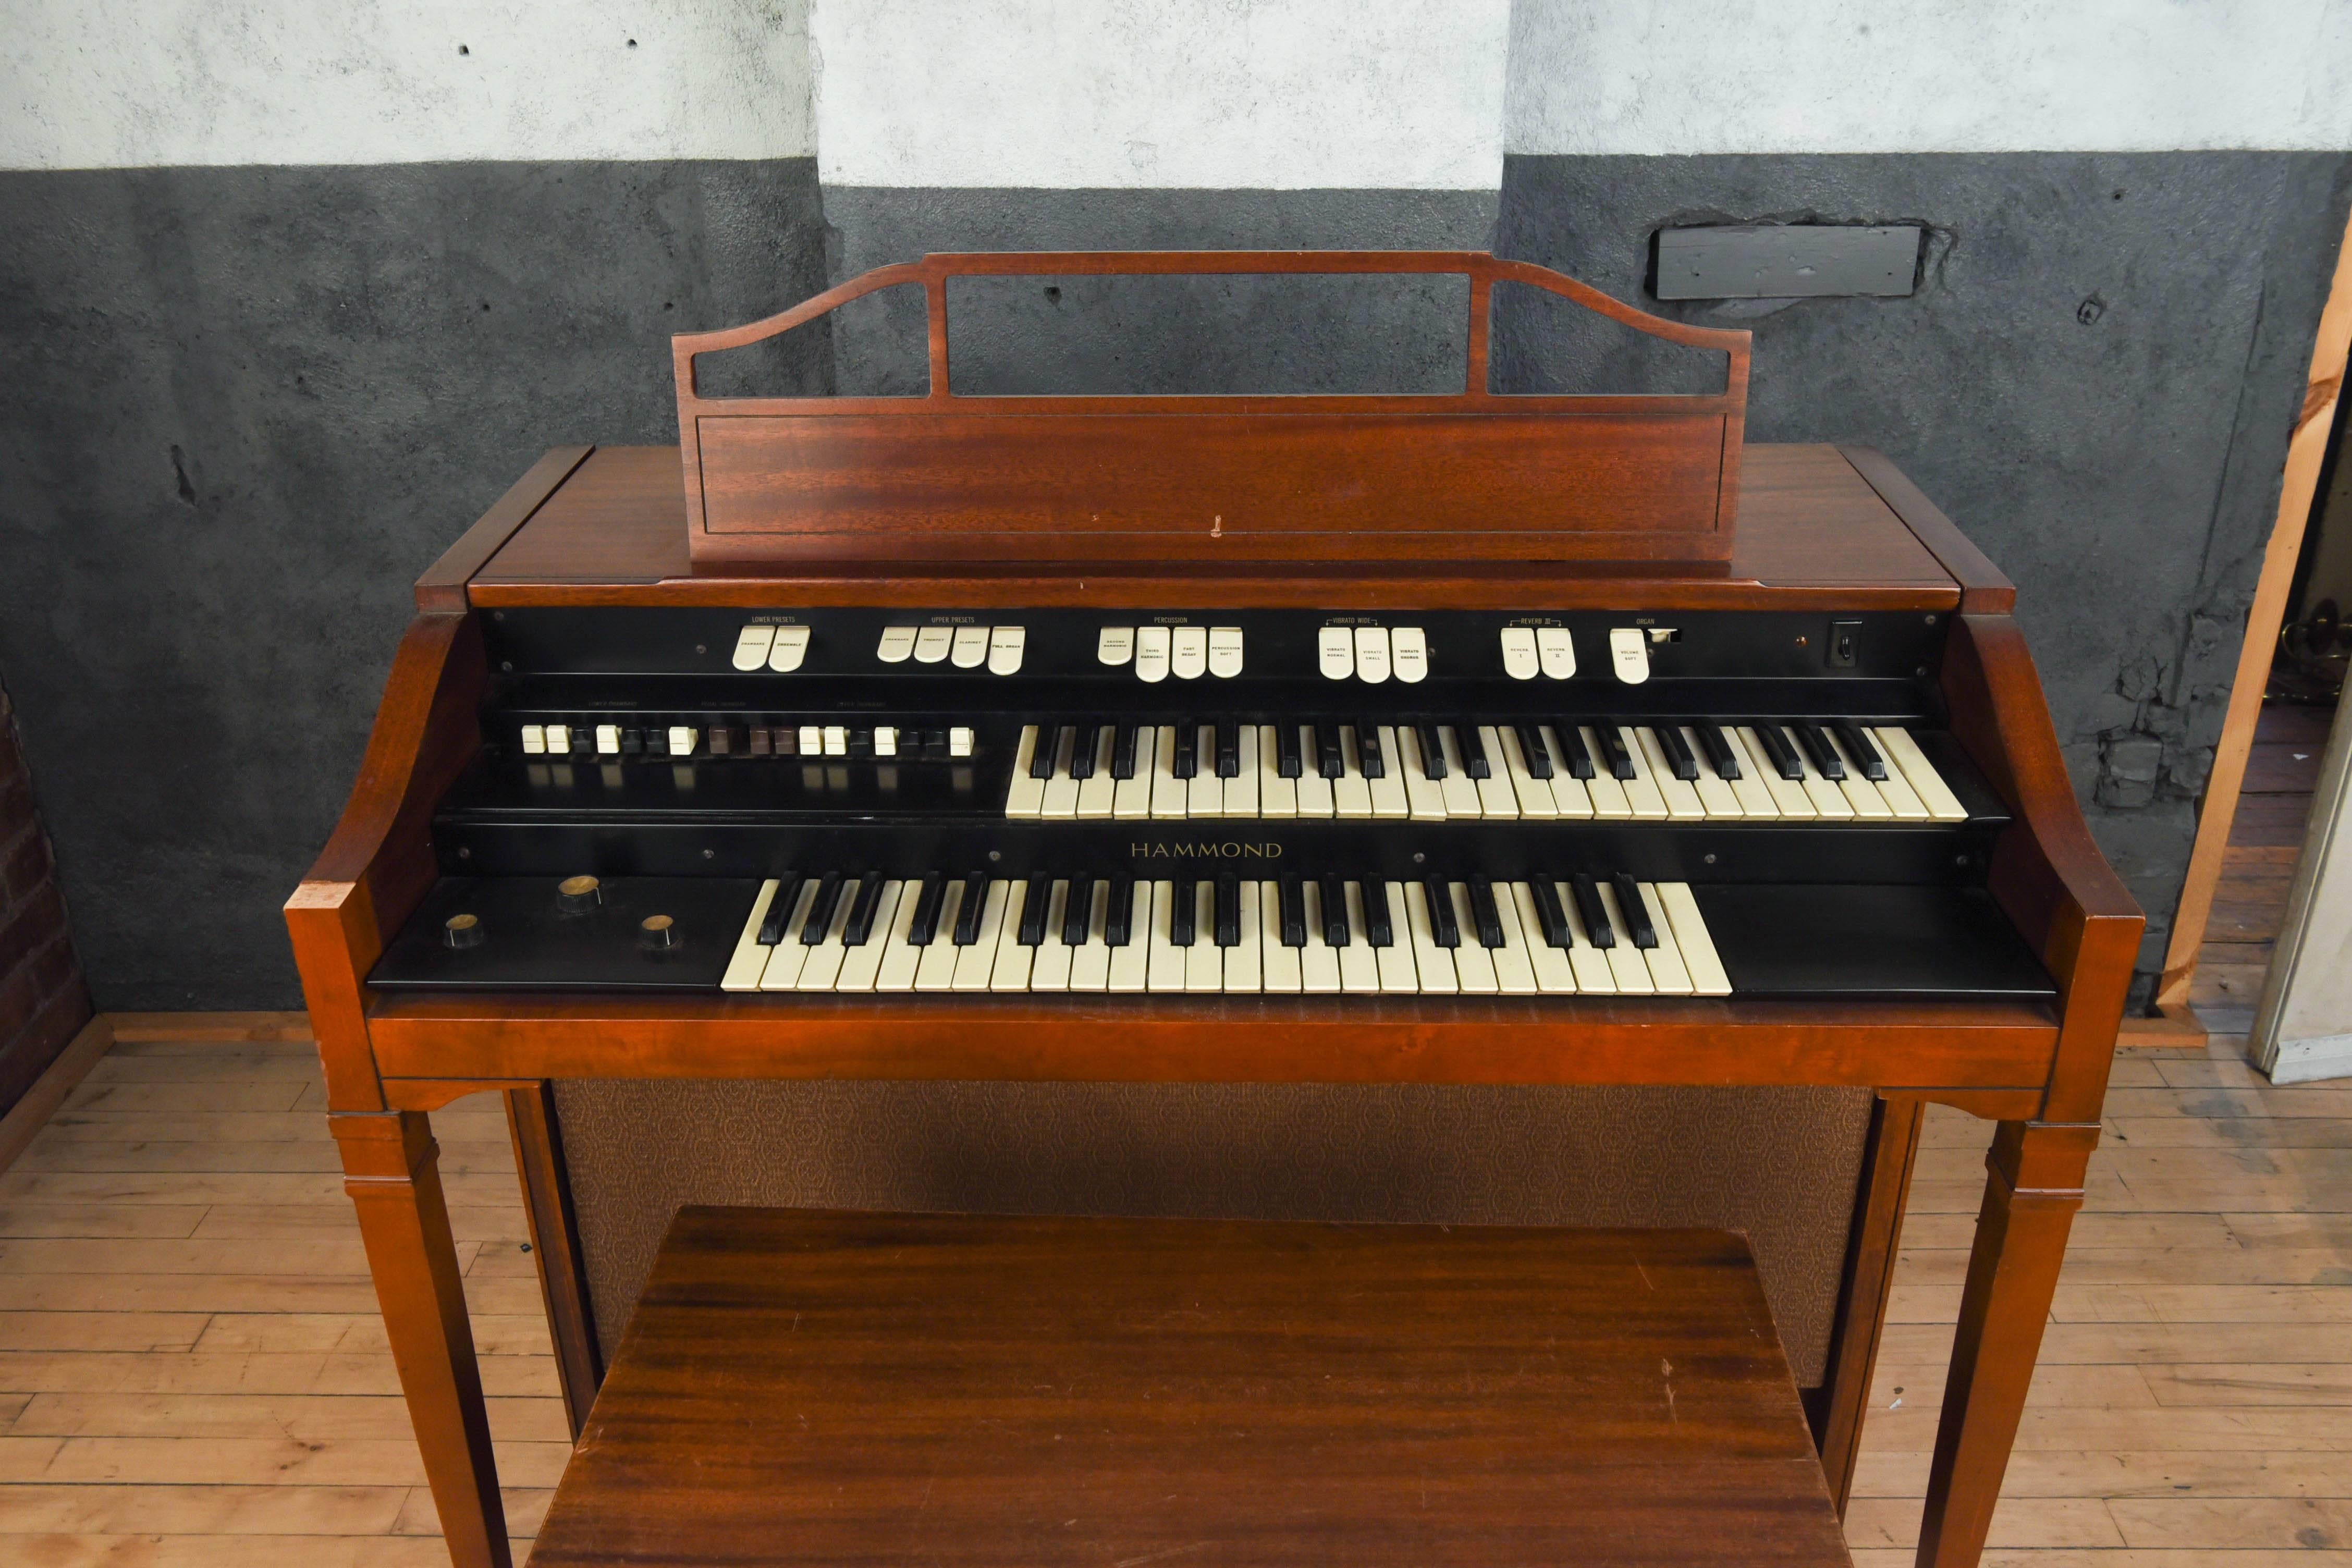 Vintage tube or tone wheel Hammond organ. Excellent sound. Has psychedelic percussion effect board, added speaker jack output (auto switching jack, disconnects built-in speakers when plug is inserted) for added versatility in studio. Includes